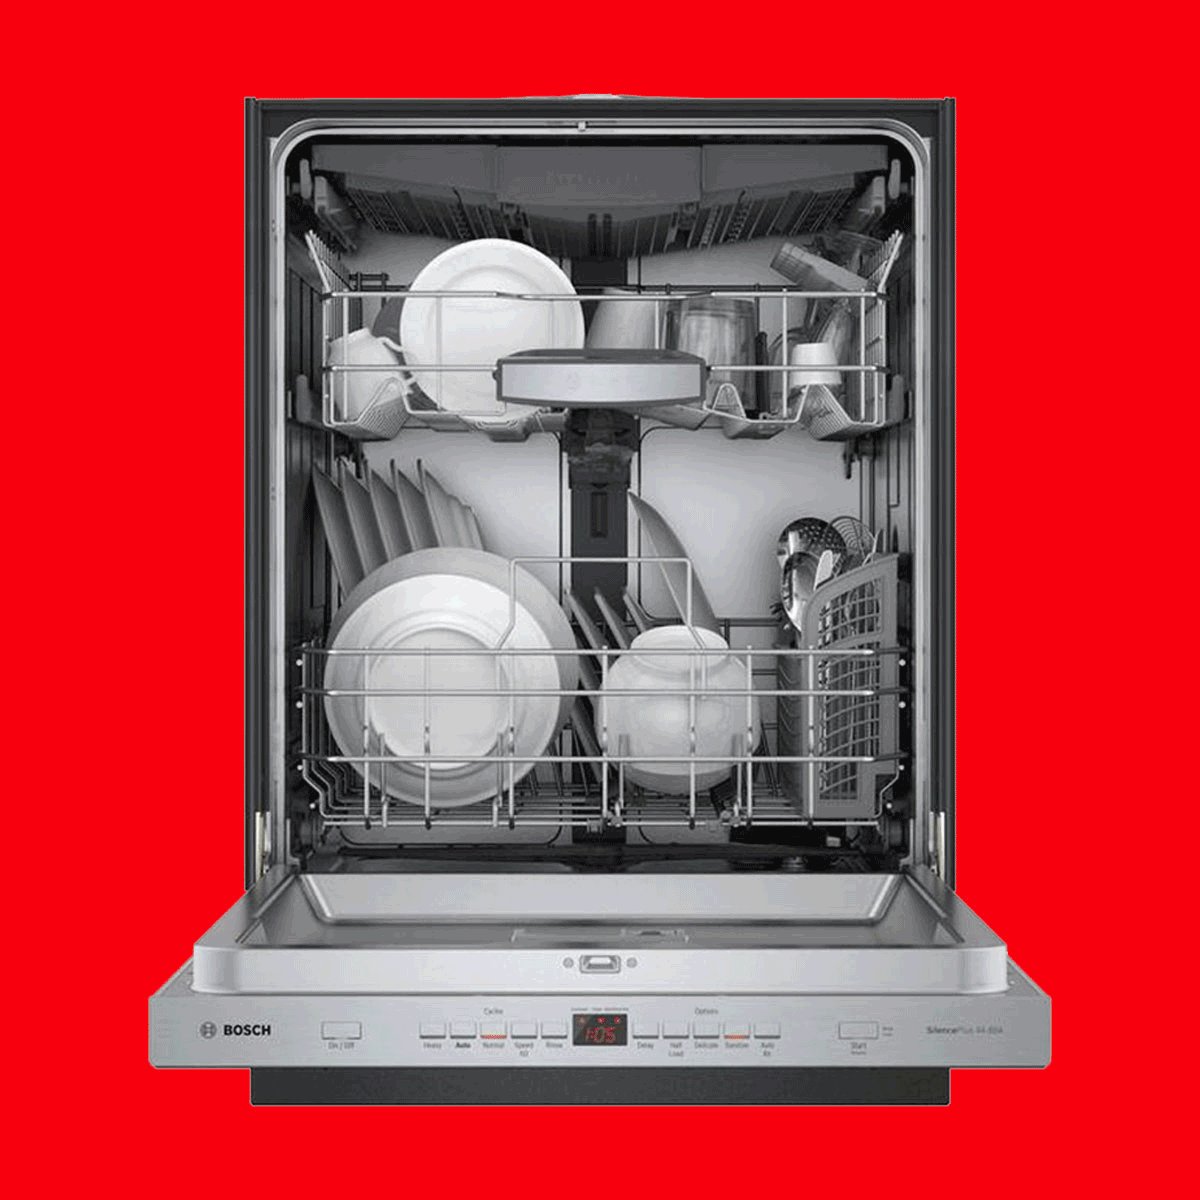 The 5 Best Dishwasher Brands, According to Appliance Experts